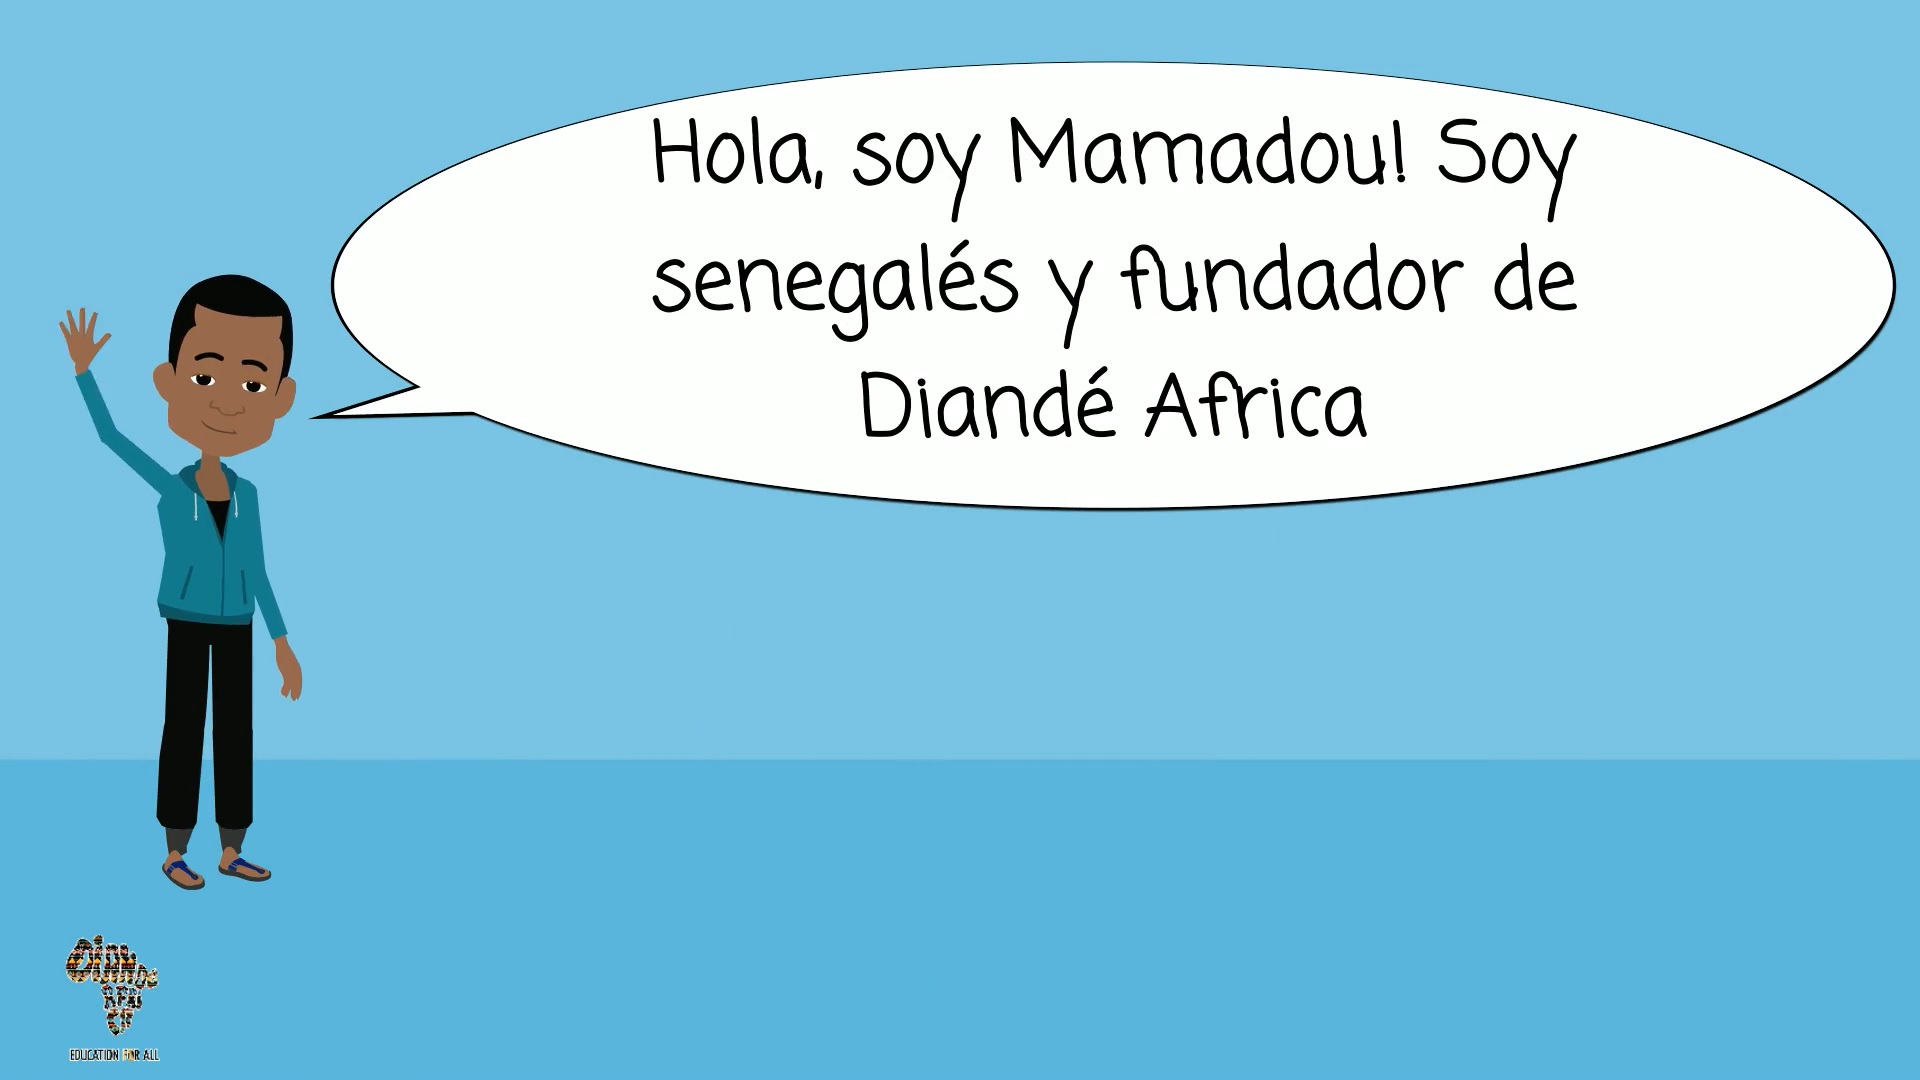 Mamadou explains his own experience developing an SSE initiative: Diandé Africa